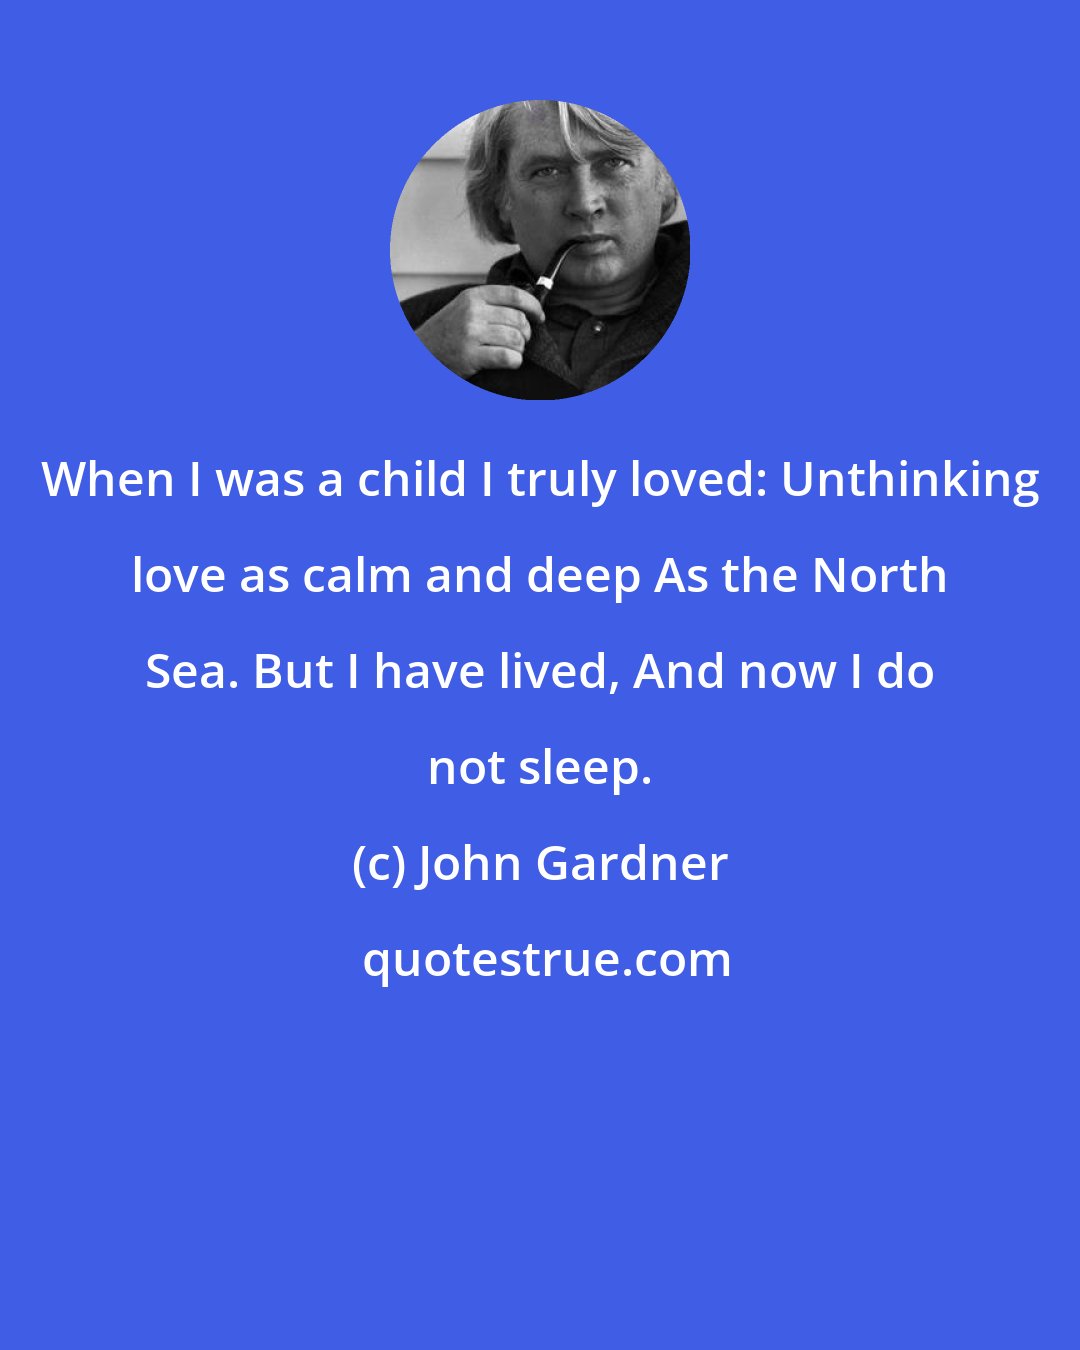 John Gardner: When I was a child I truly loved: Unthinking love as calm and deep As the North Sea. But I have lived, And now I do not sleep.